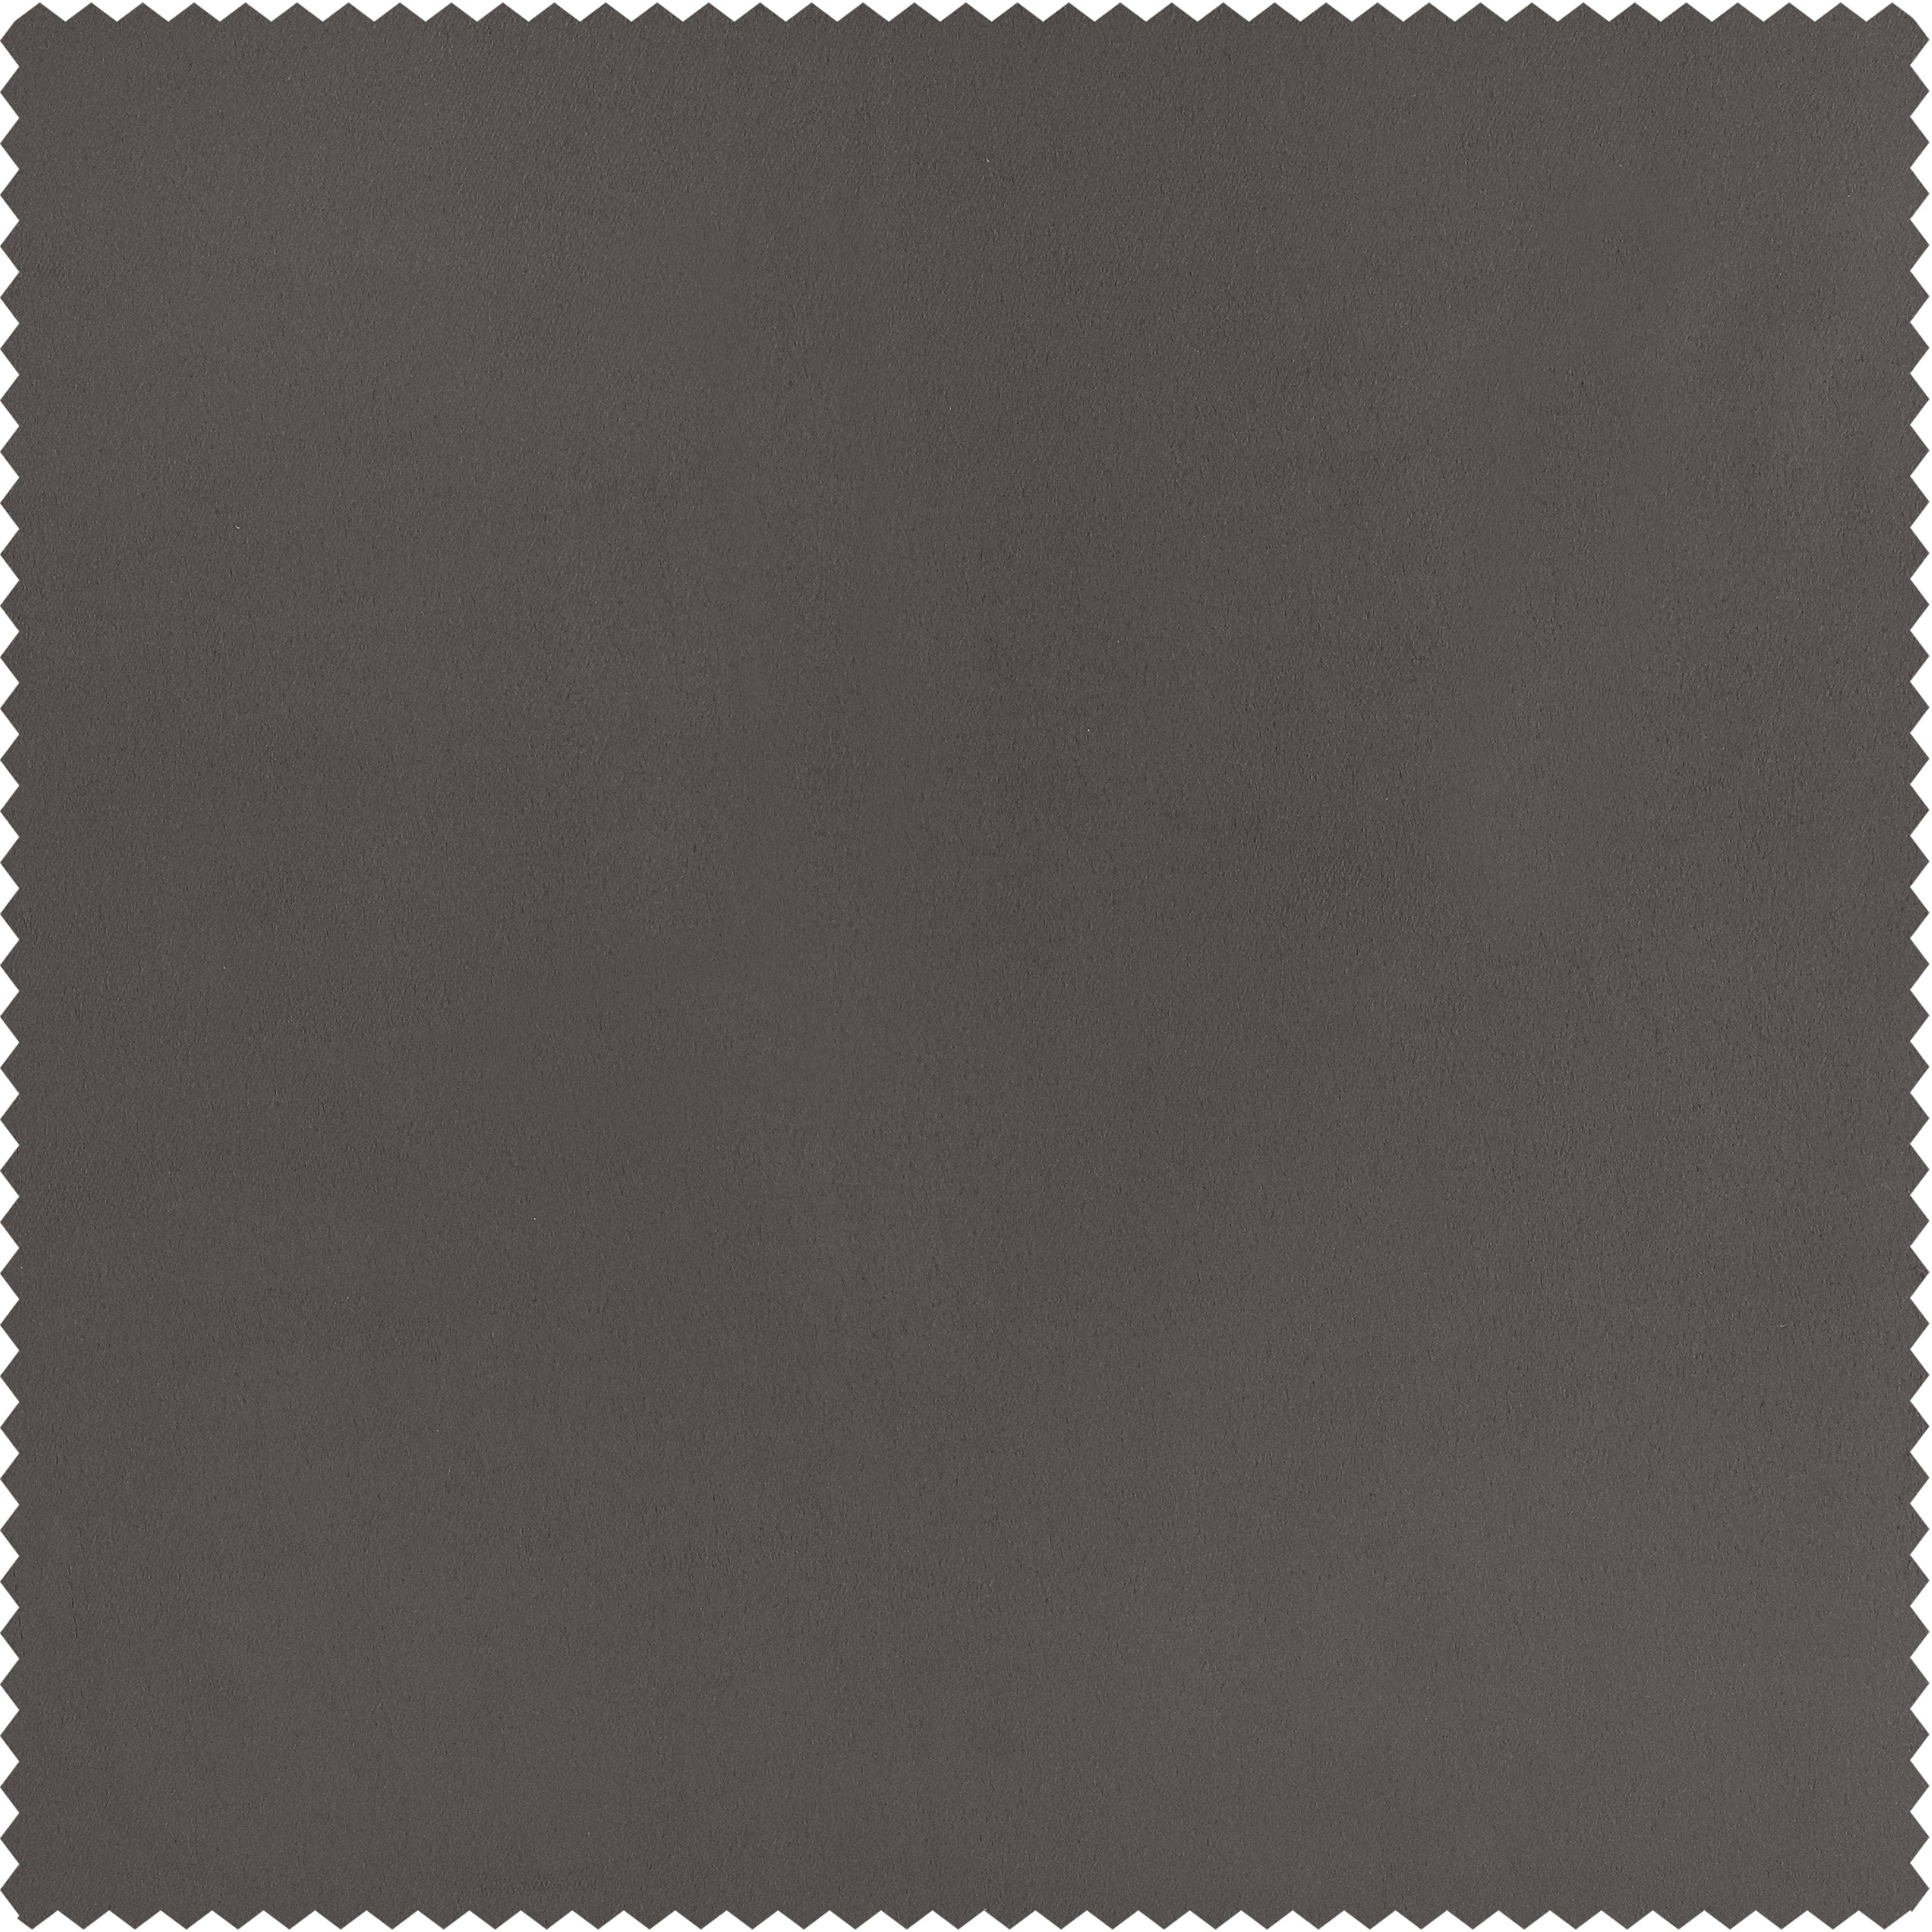 Neutral Grey Solid Polyester Swatch